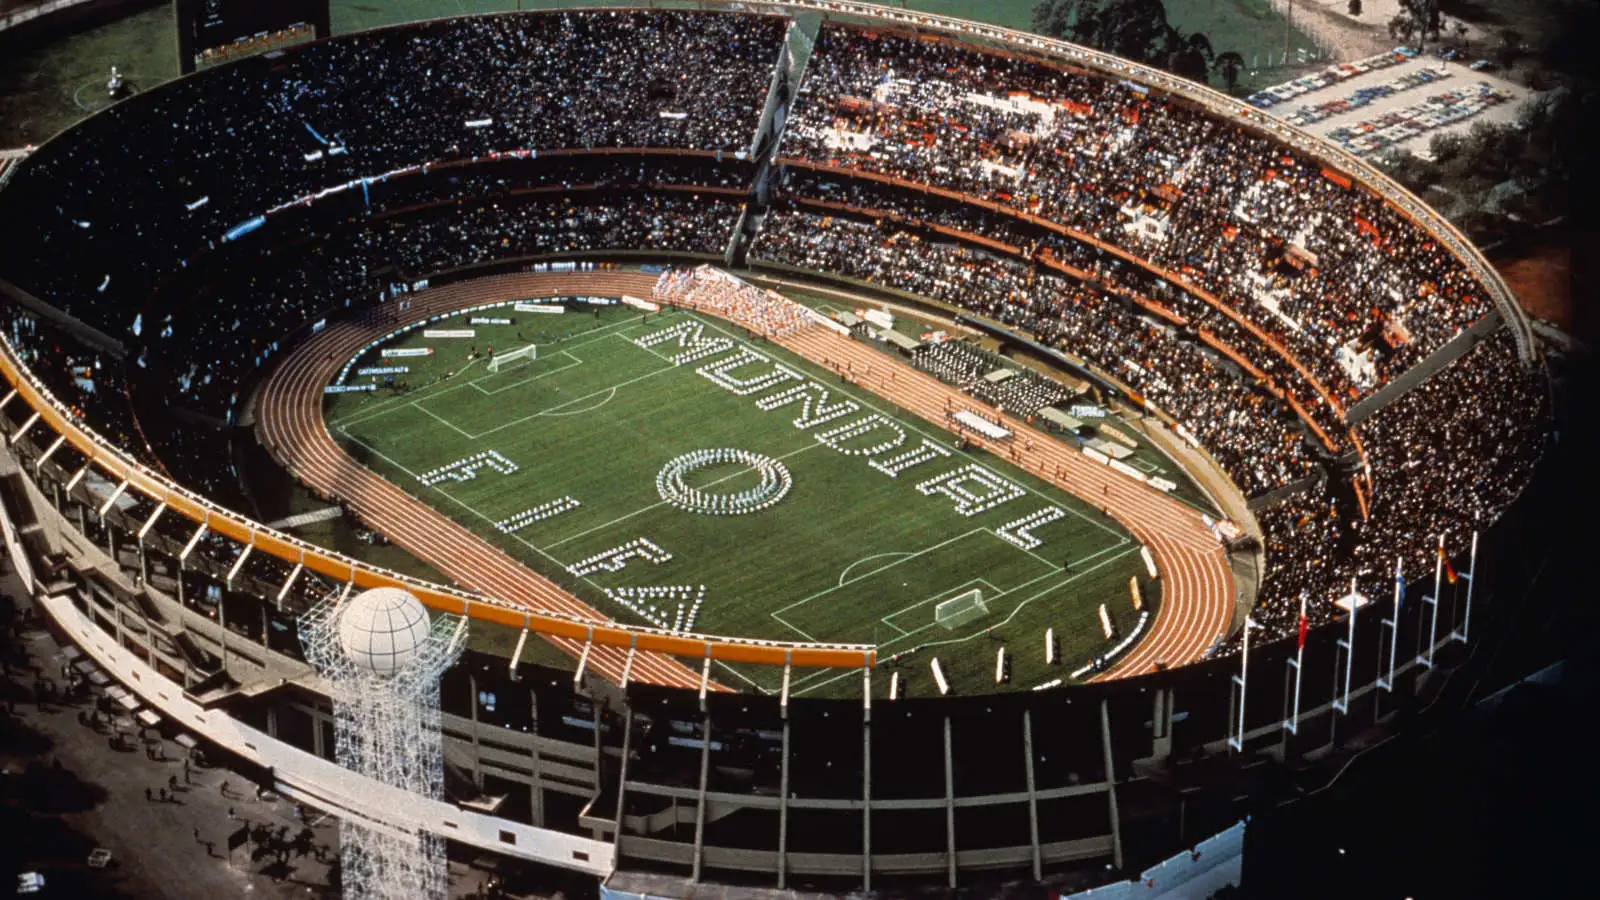 Overhead shot of the opening ceremony to the 1978 World Cup